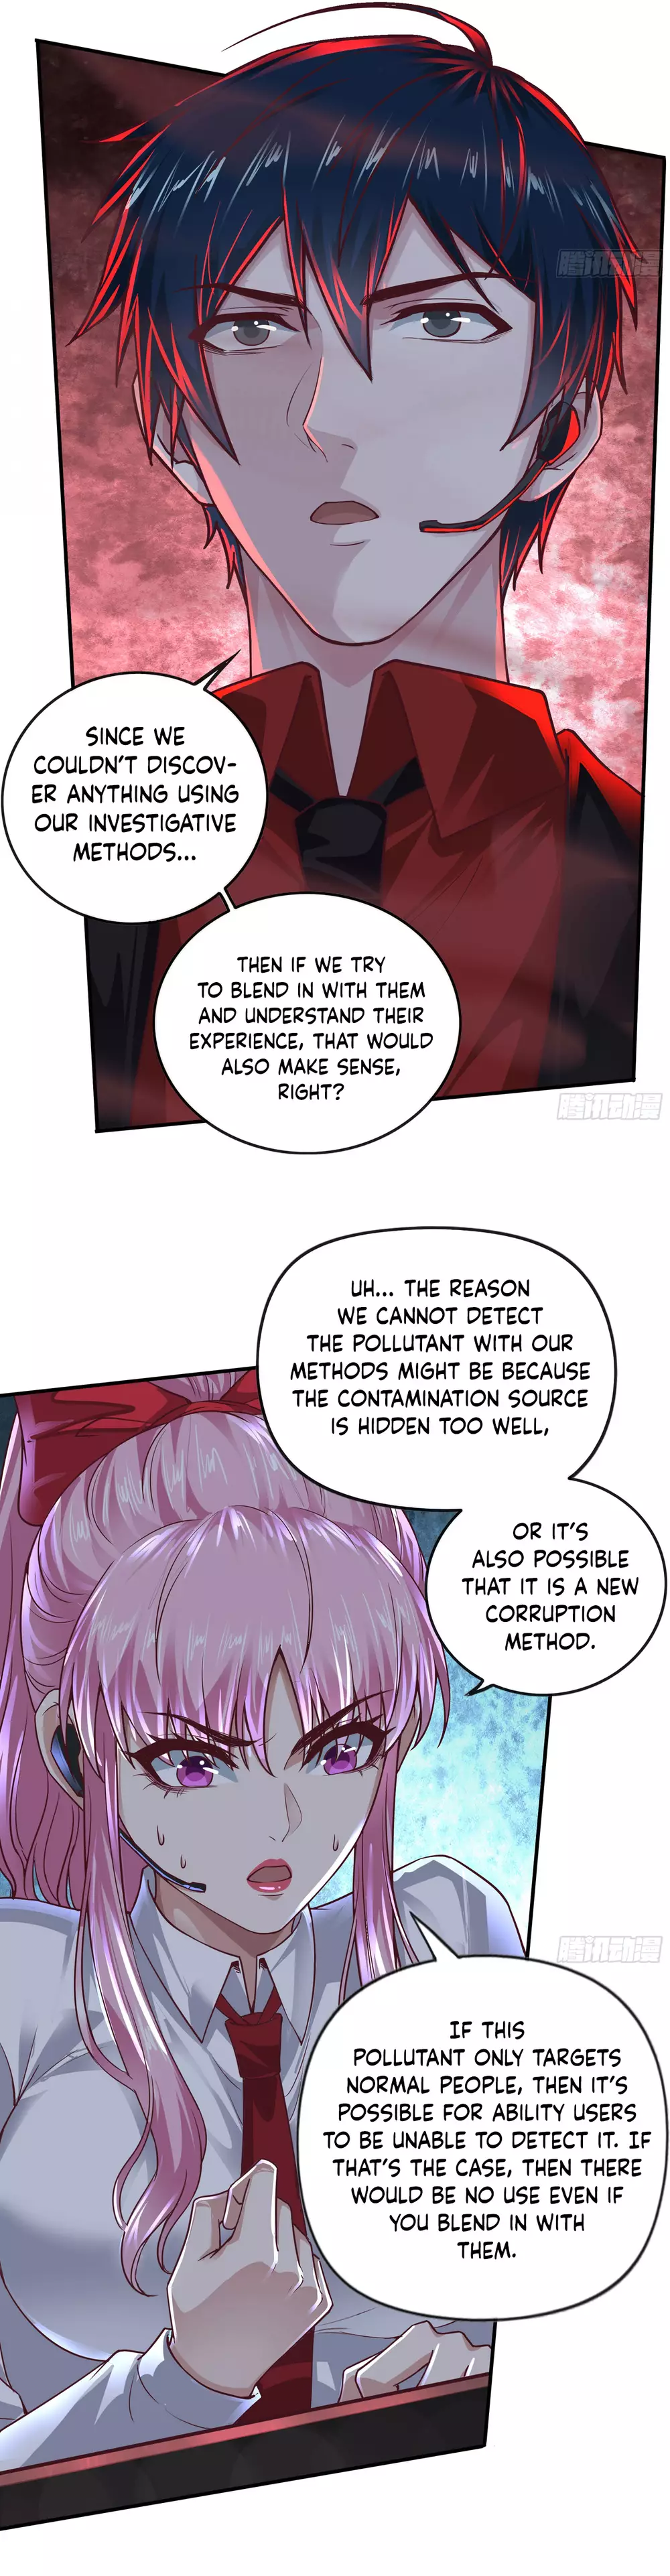 Since The Red Moon Appeared - 45 page 5-6d34ae7a